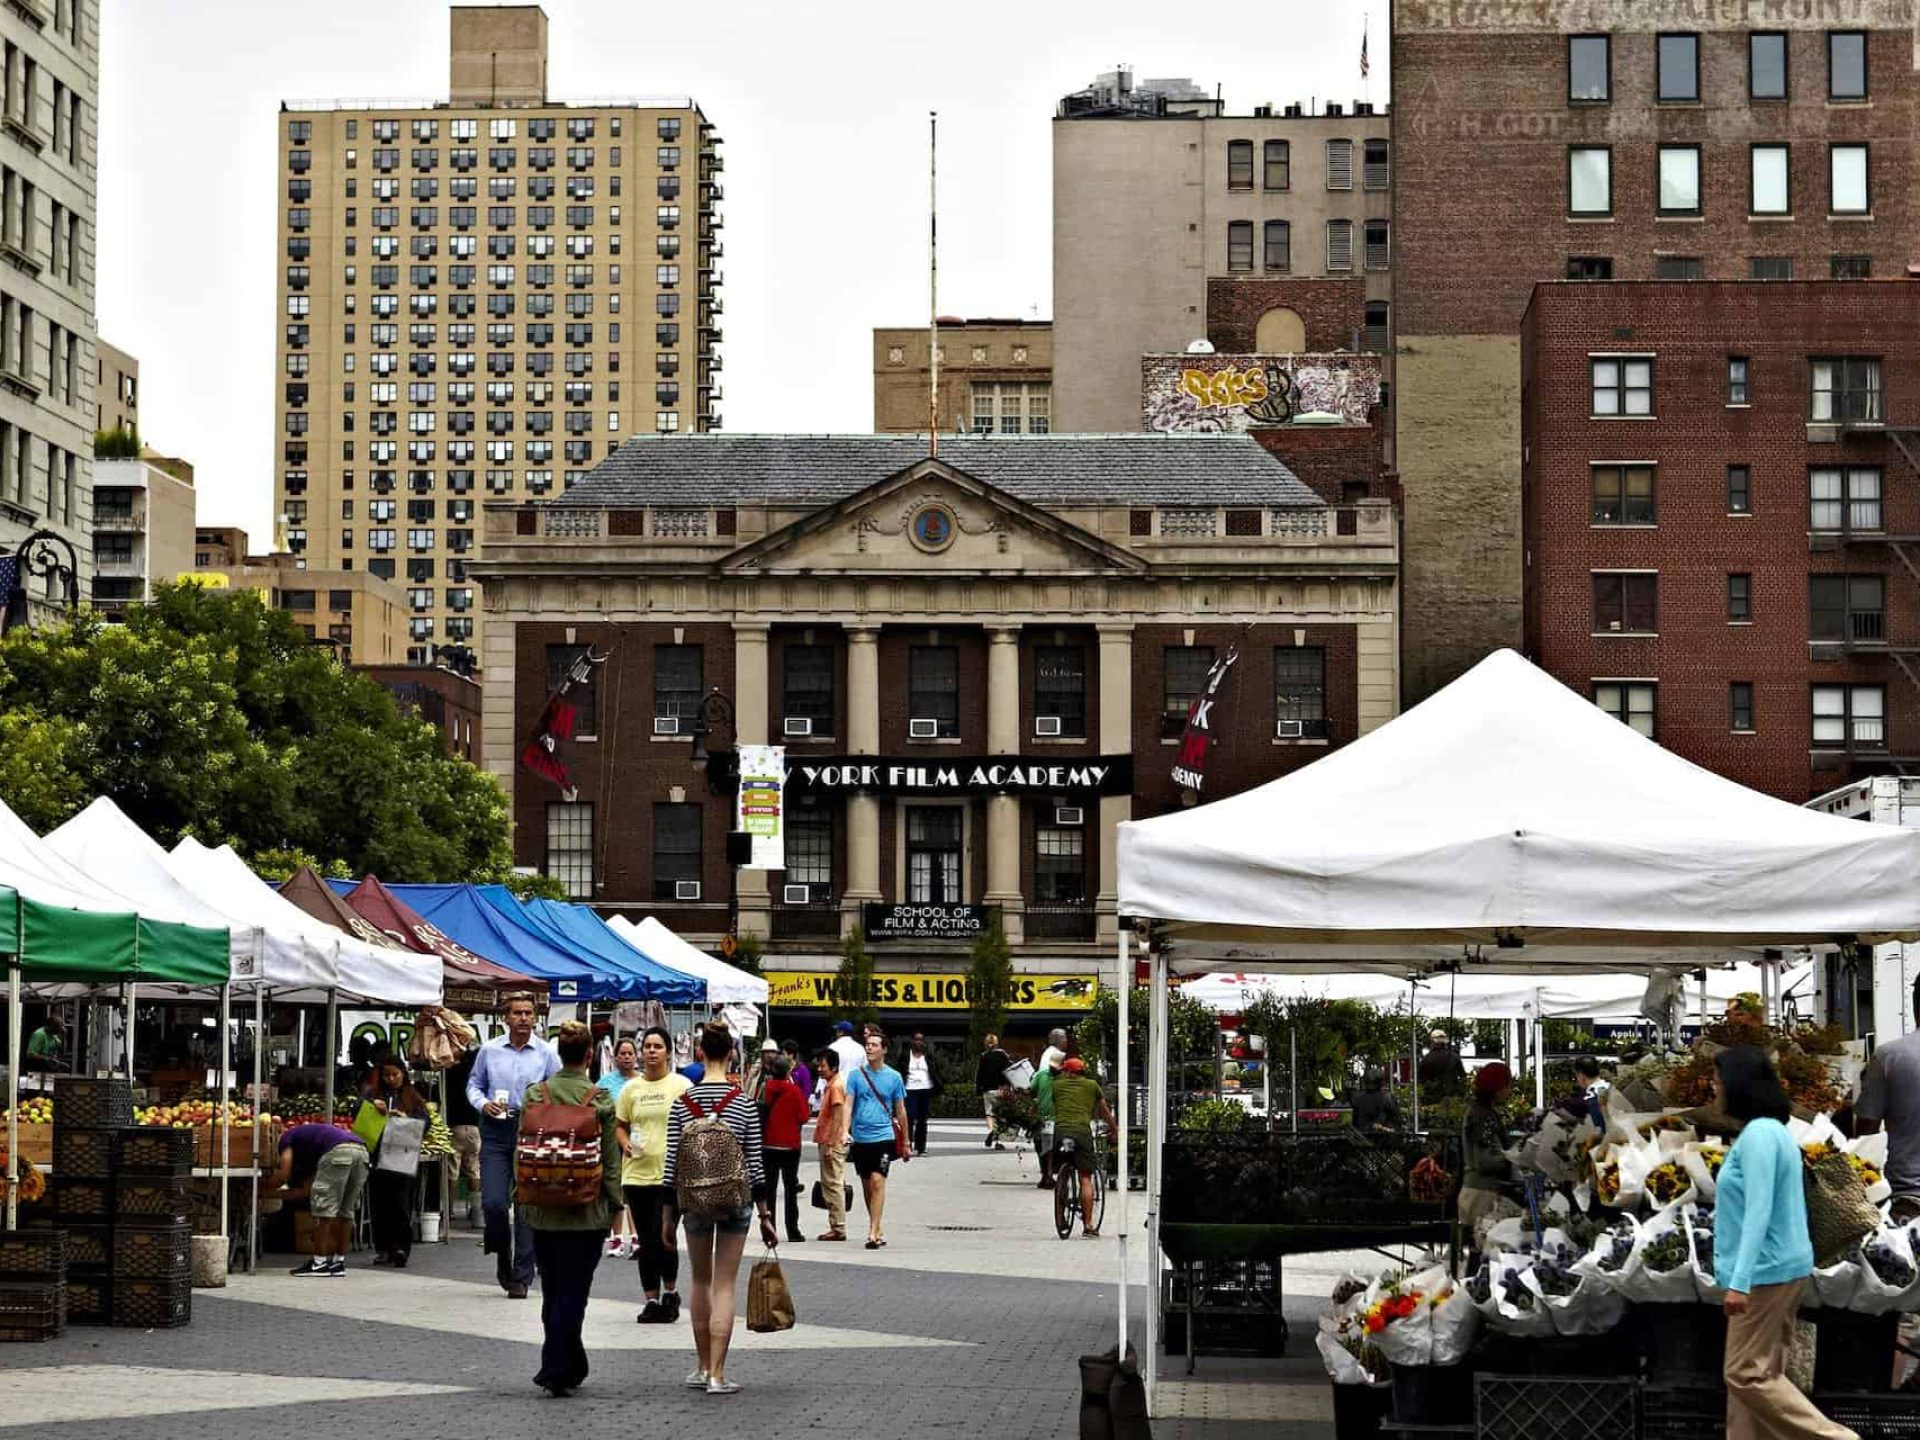 Outdoor market in New York's East Village during in front of the New York Film Academy with pop up tents and people walking.